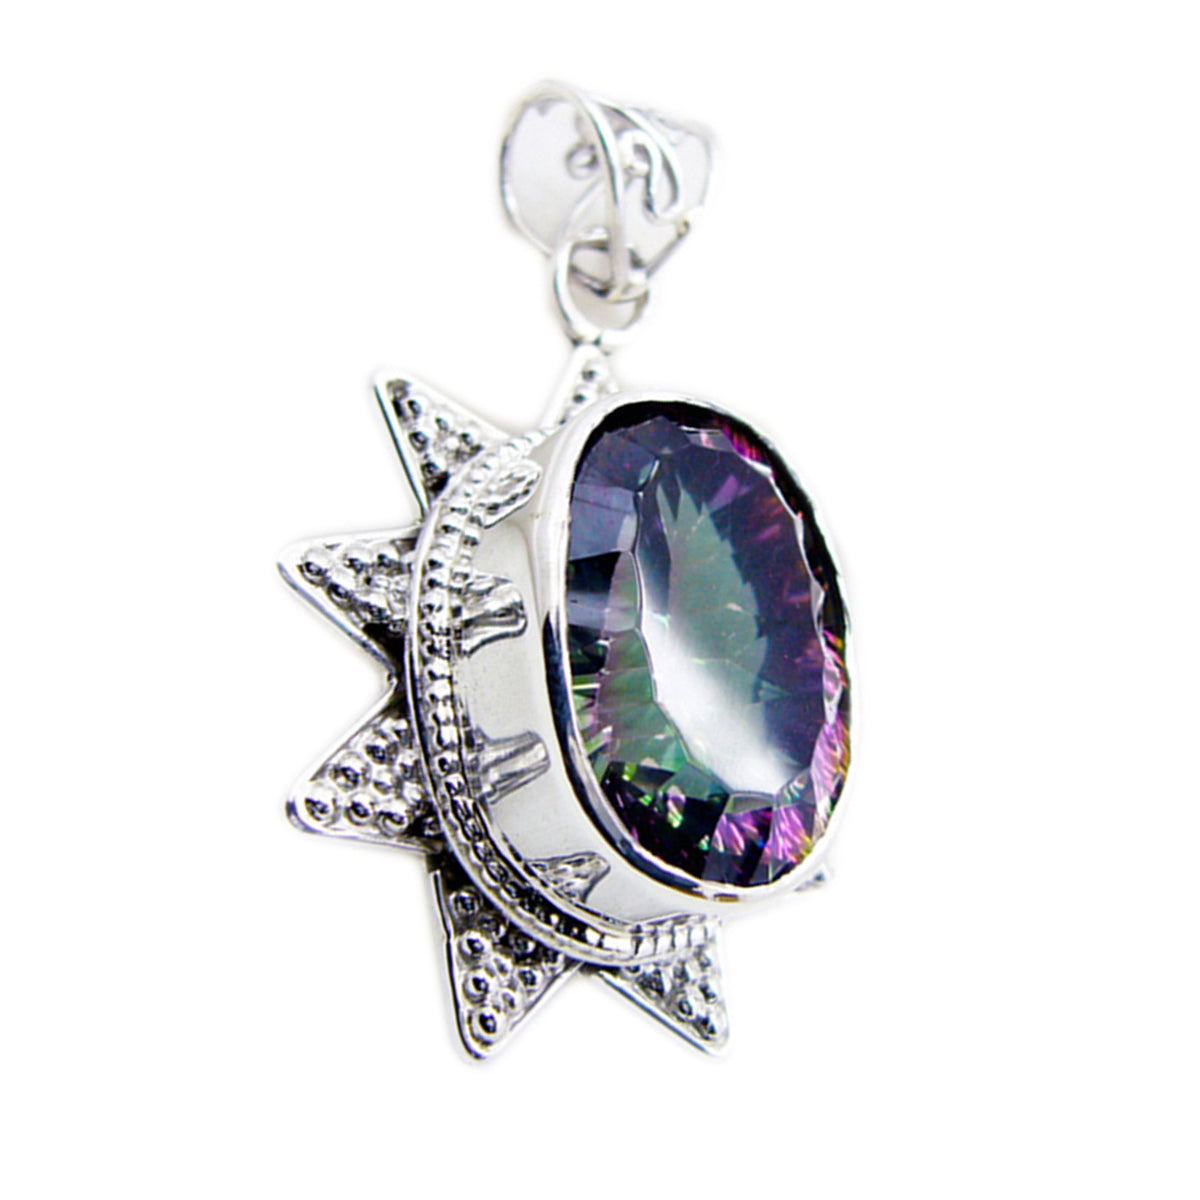 Riyo Handsome Gems Oval Faceted Multi Color Mystic Quartz Solid Silver Pendant Gift For Anniversary